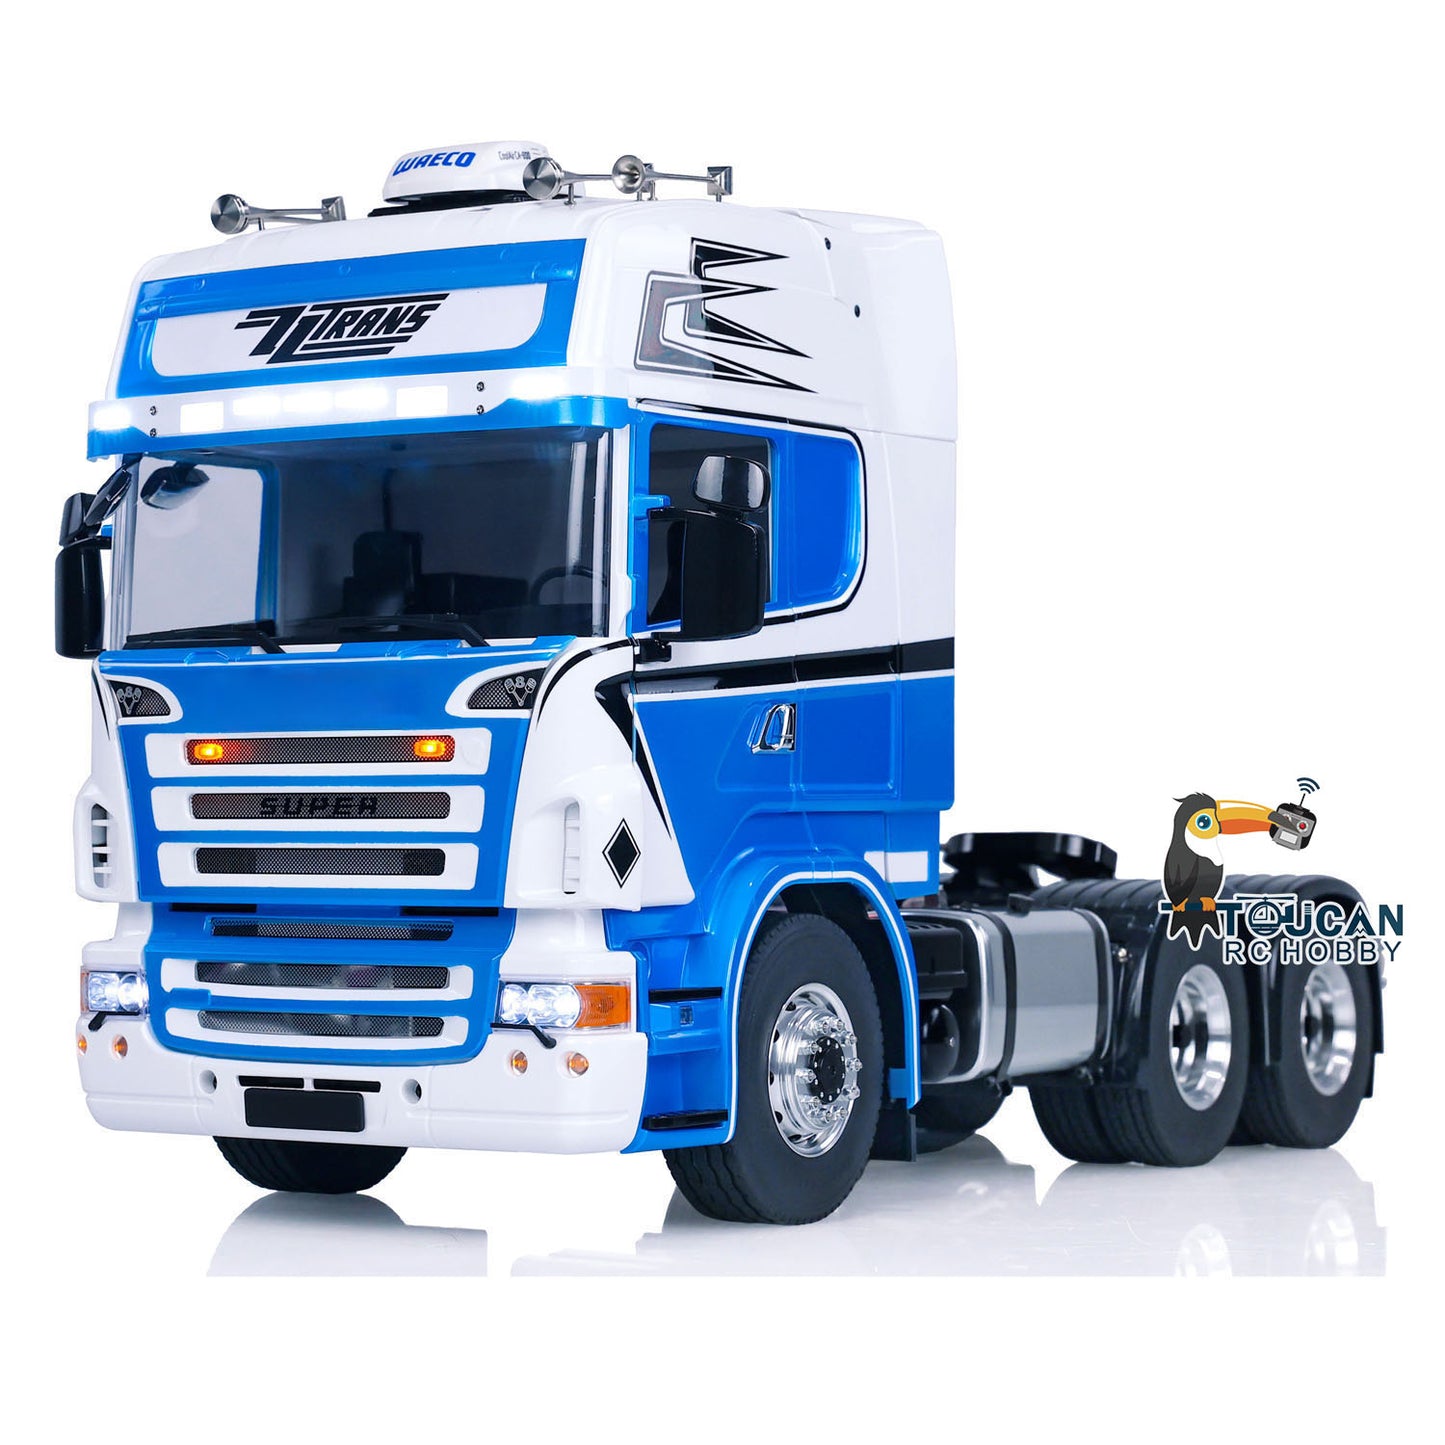 IN STOCK LESU 1/14 6x6 RC Tractor Truck Painted Assembled Radio Control Car Metal Chassis Hobby Model Optional Versions ESC Servo Motor